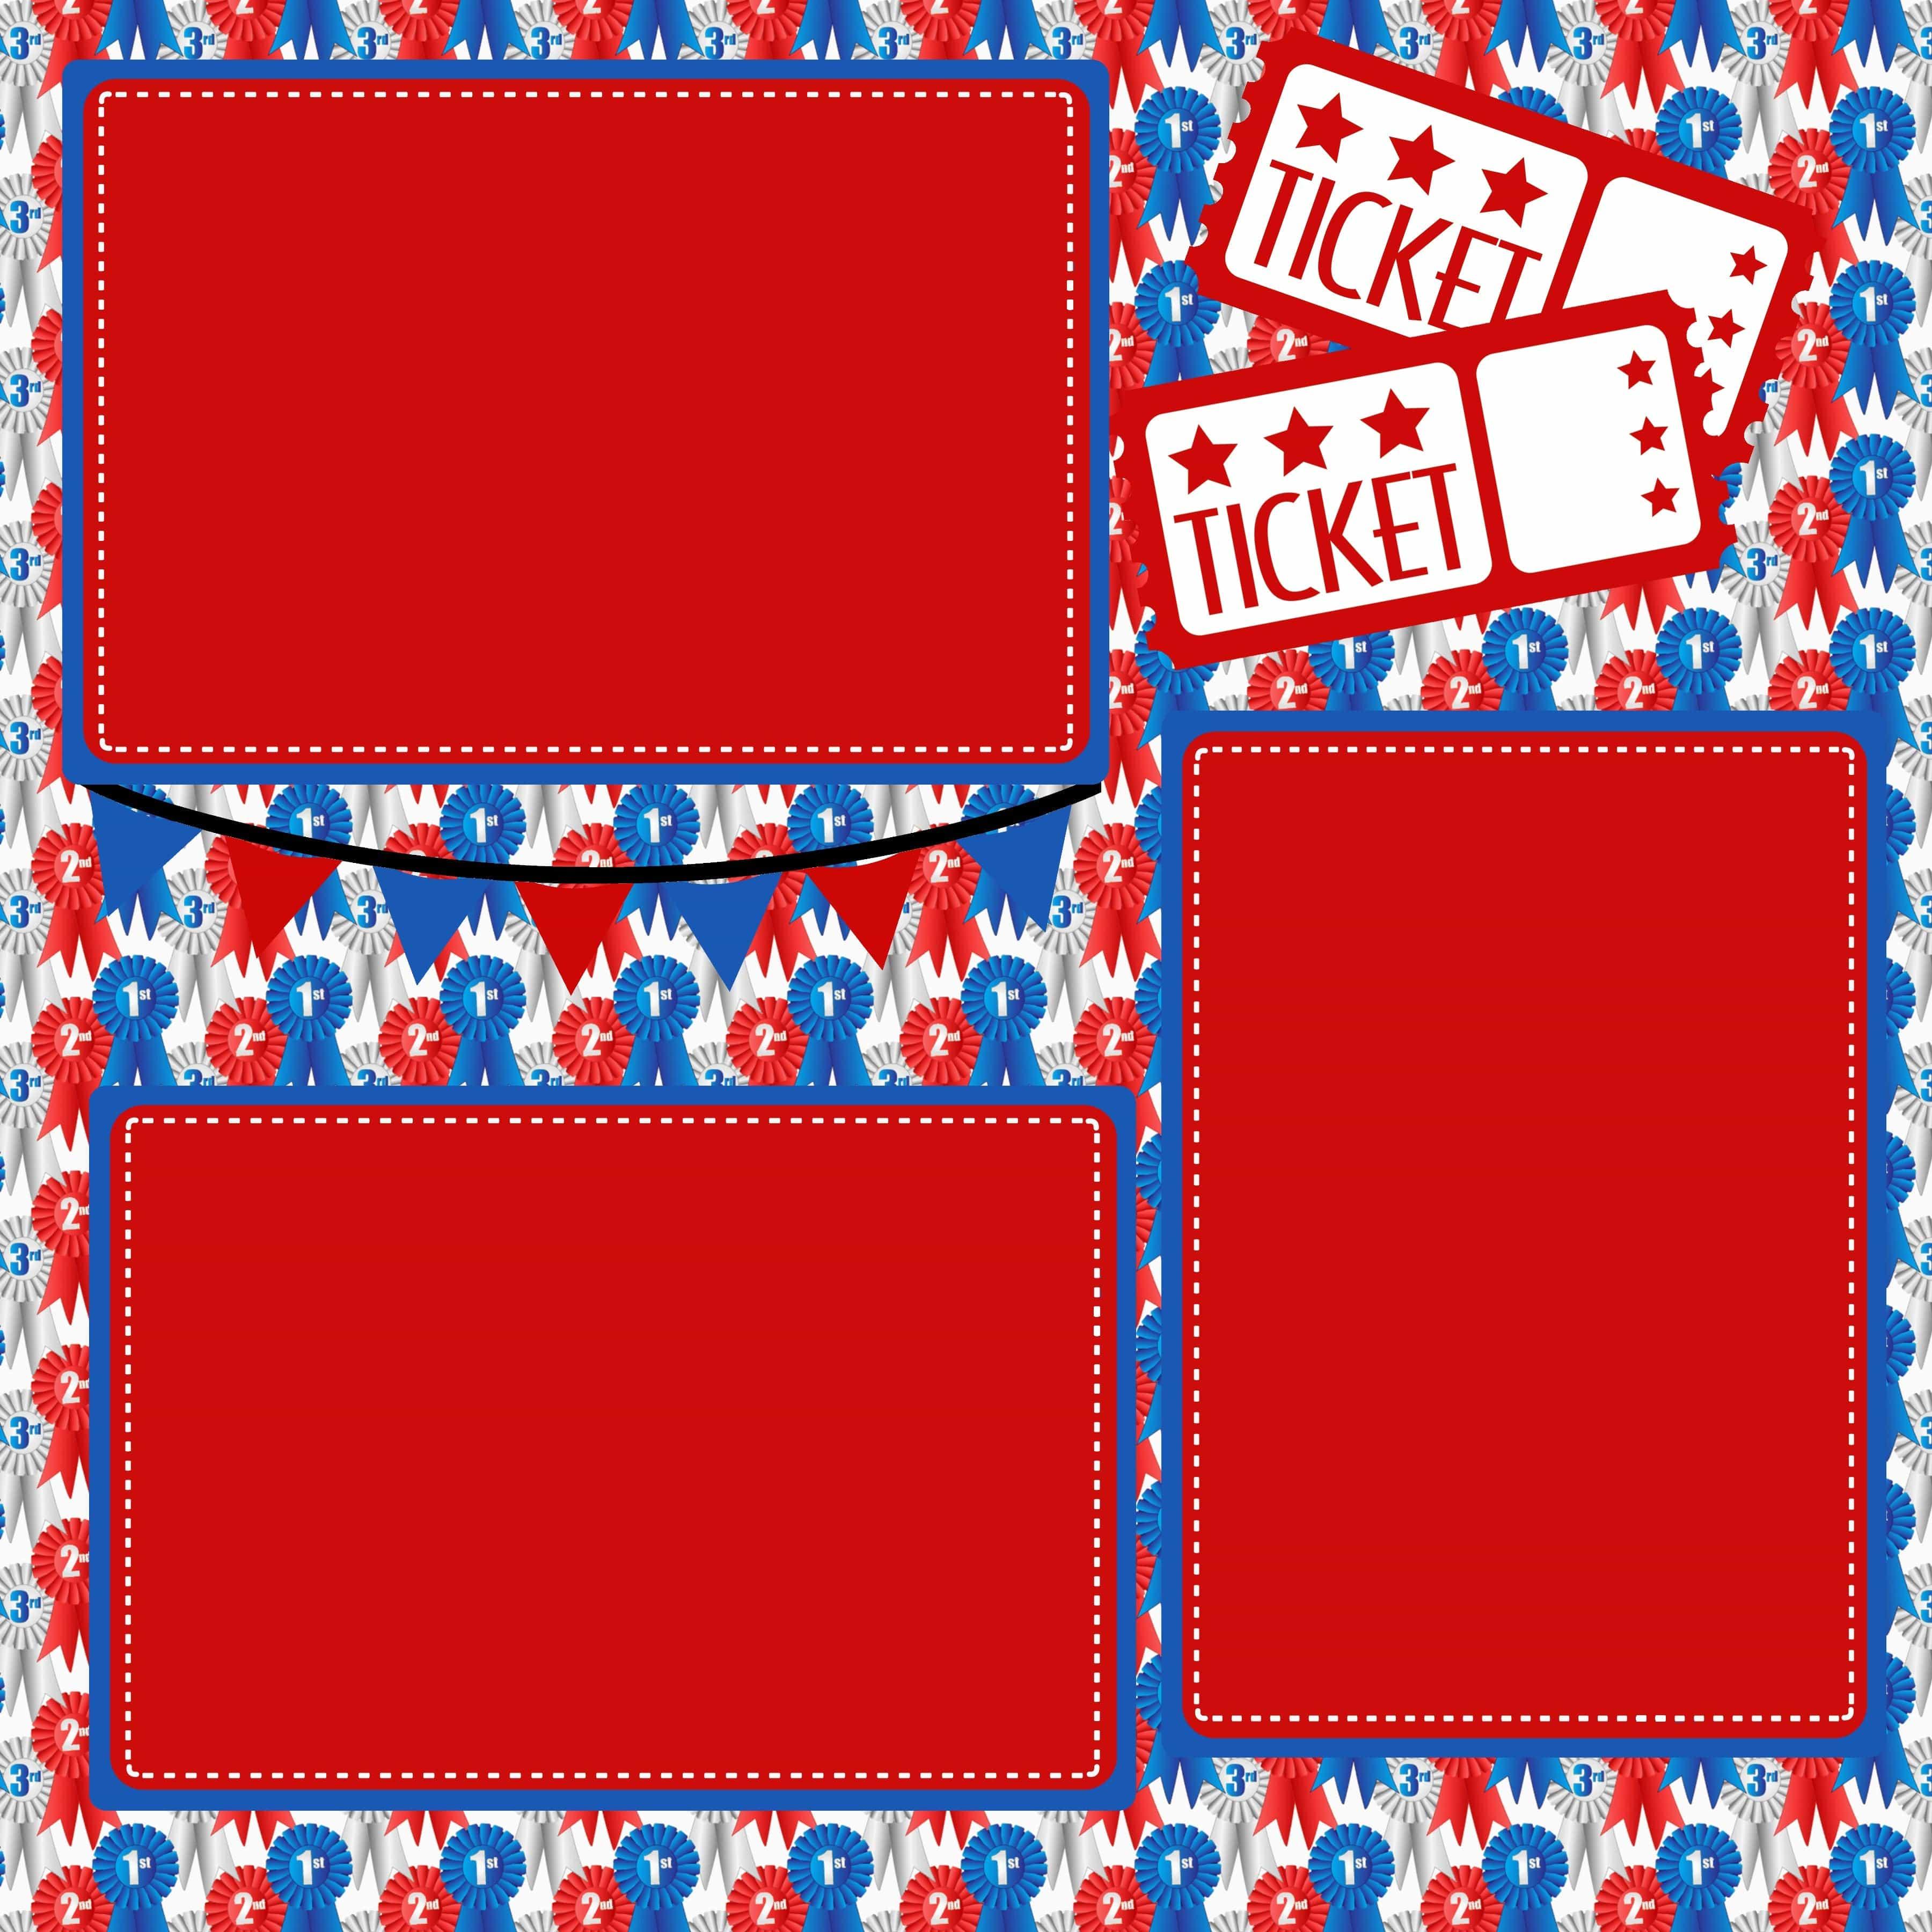 Fun At The Fair (2) - 12 x 12 Premade, Printed Scrapbook Pages by SSC Designs - Scrapbook Supply Companies